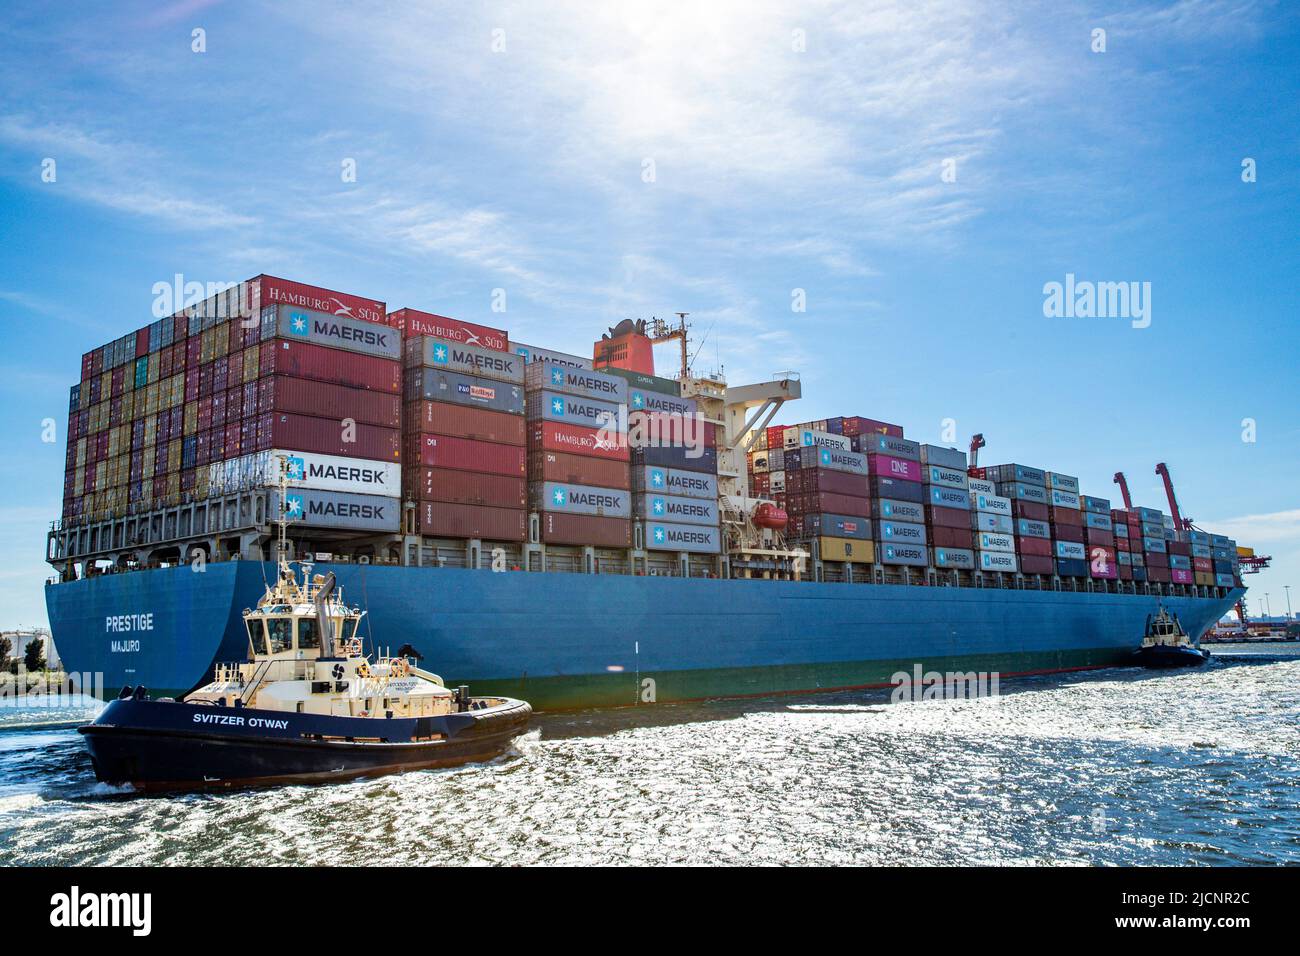 Tug with line to cargo ship with containers in Melbourne, Victoria, Australia on Sunday, April 17, 2022.Photo: David Rowland / One-Image.com Stock Photo